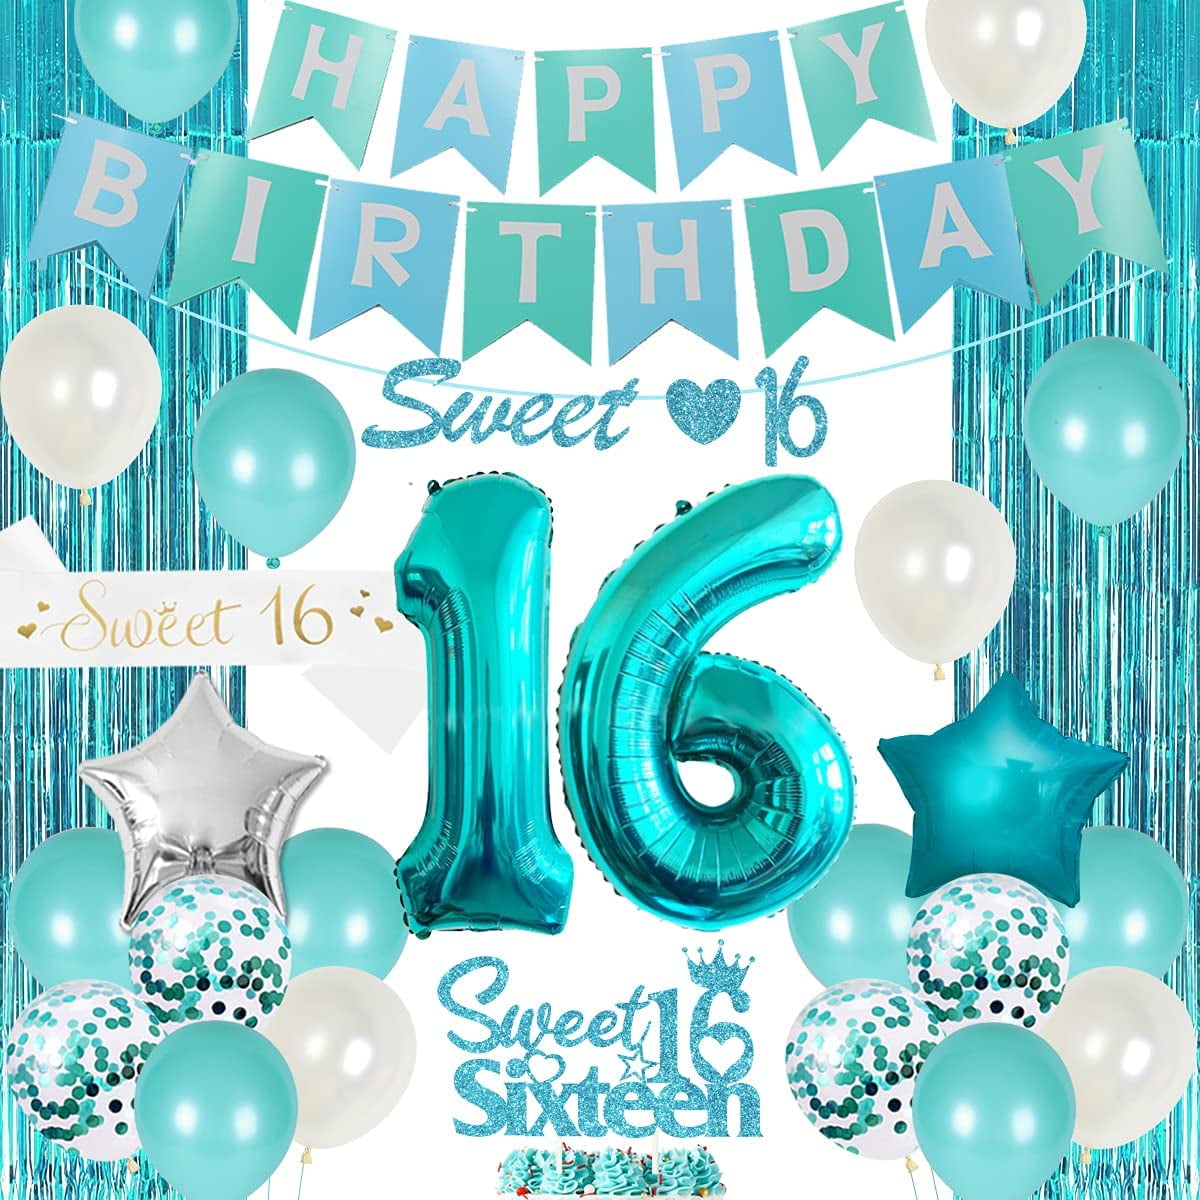 16th Birthday Decorations for Girl Teal - Sweet 16 Birthday Party Supplies Number 16 Foil Balloon Happy Birthday Banner Sweet 16 Sash Turquoise Fringe Curtain for Sixteen Birthday Decor - Walmart.com